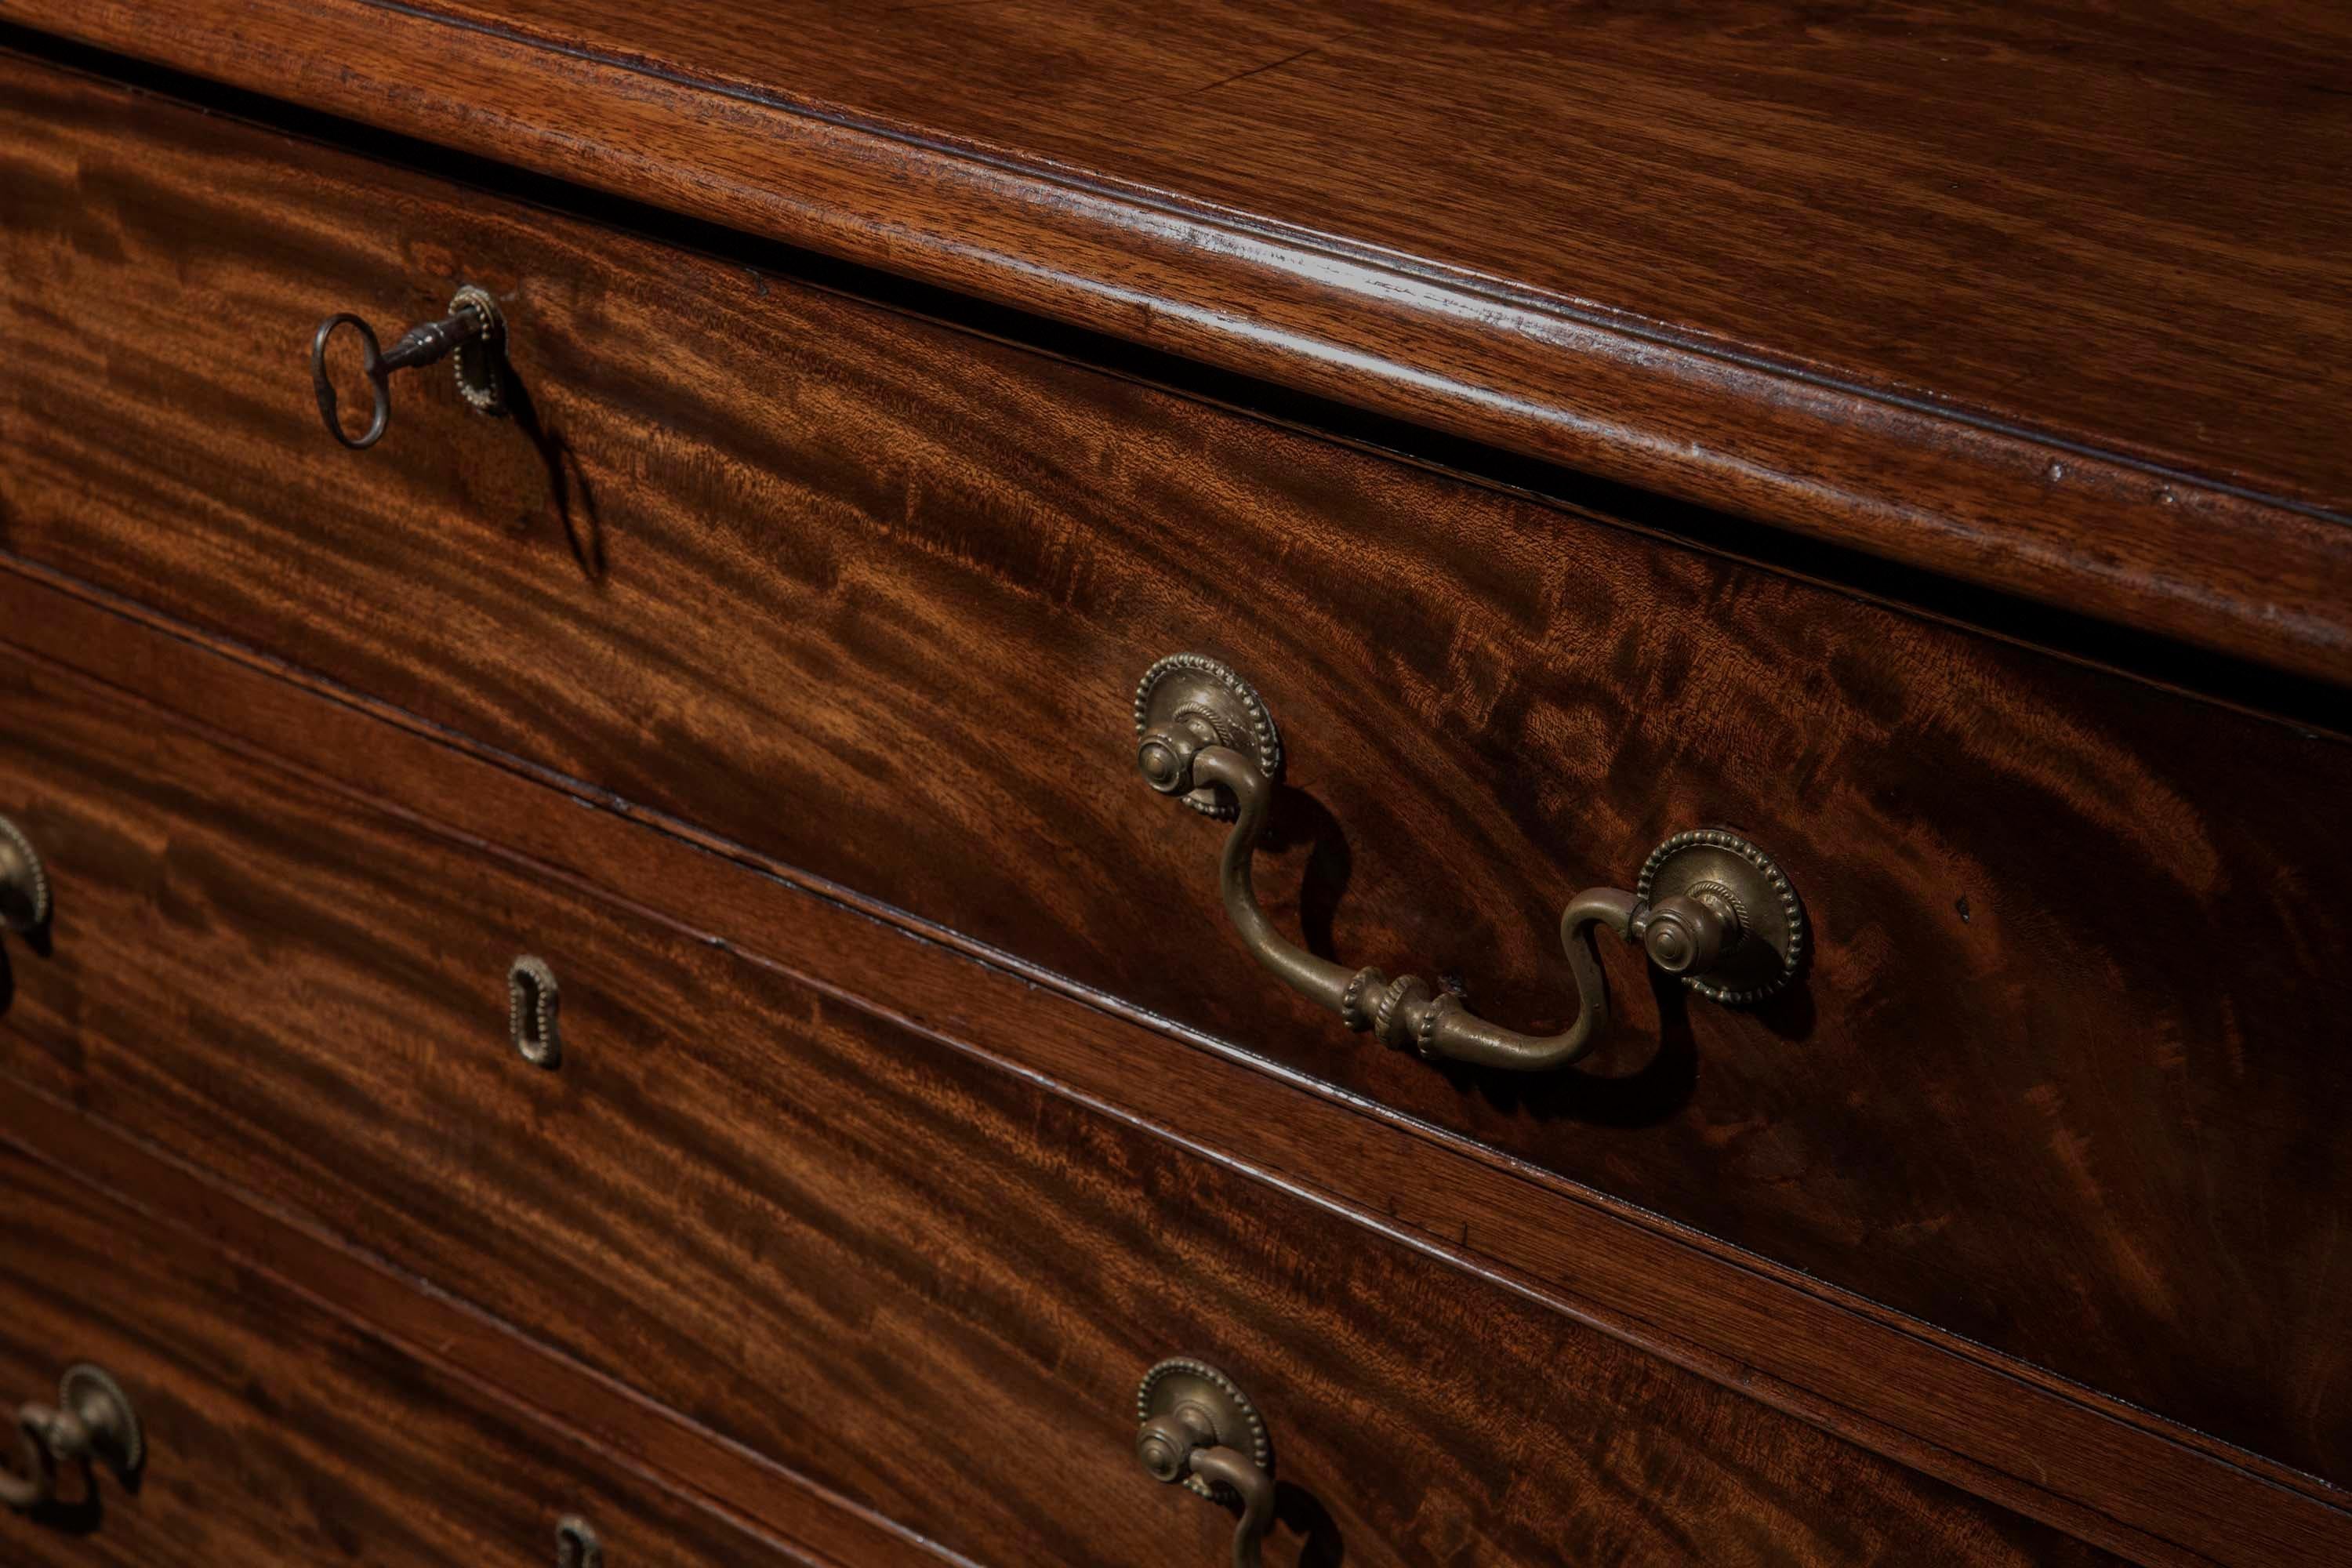 A fine quality Chippendale period chest of drawers in beautifully figured mahogany.
English, c. 1770

Why we like it
We have chosen it for its sturdy proportions, superb quality and a great choice of veneers. A very handsome and masculine piece of